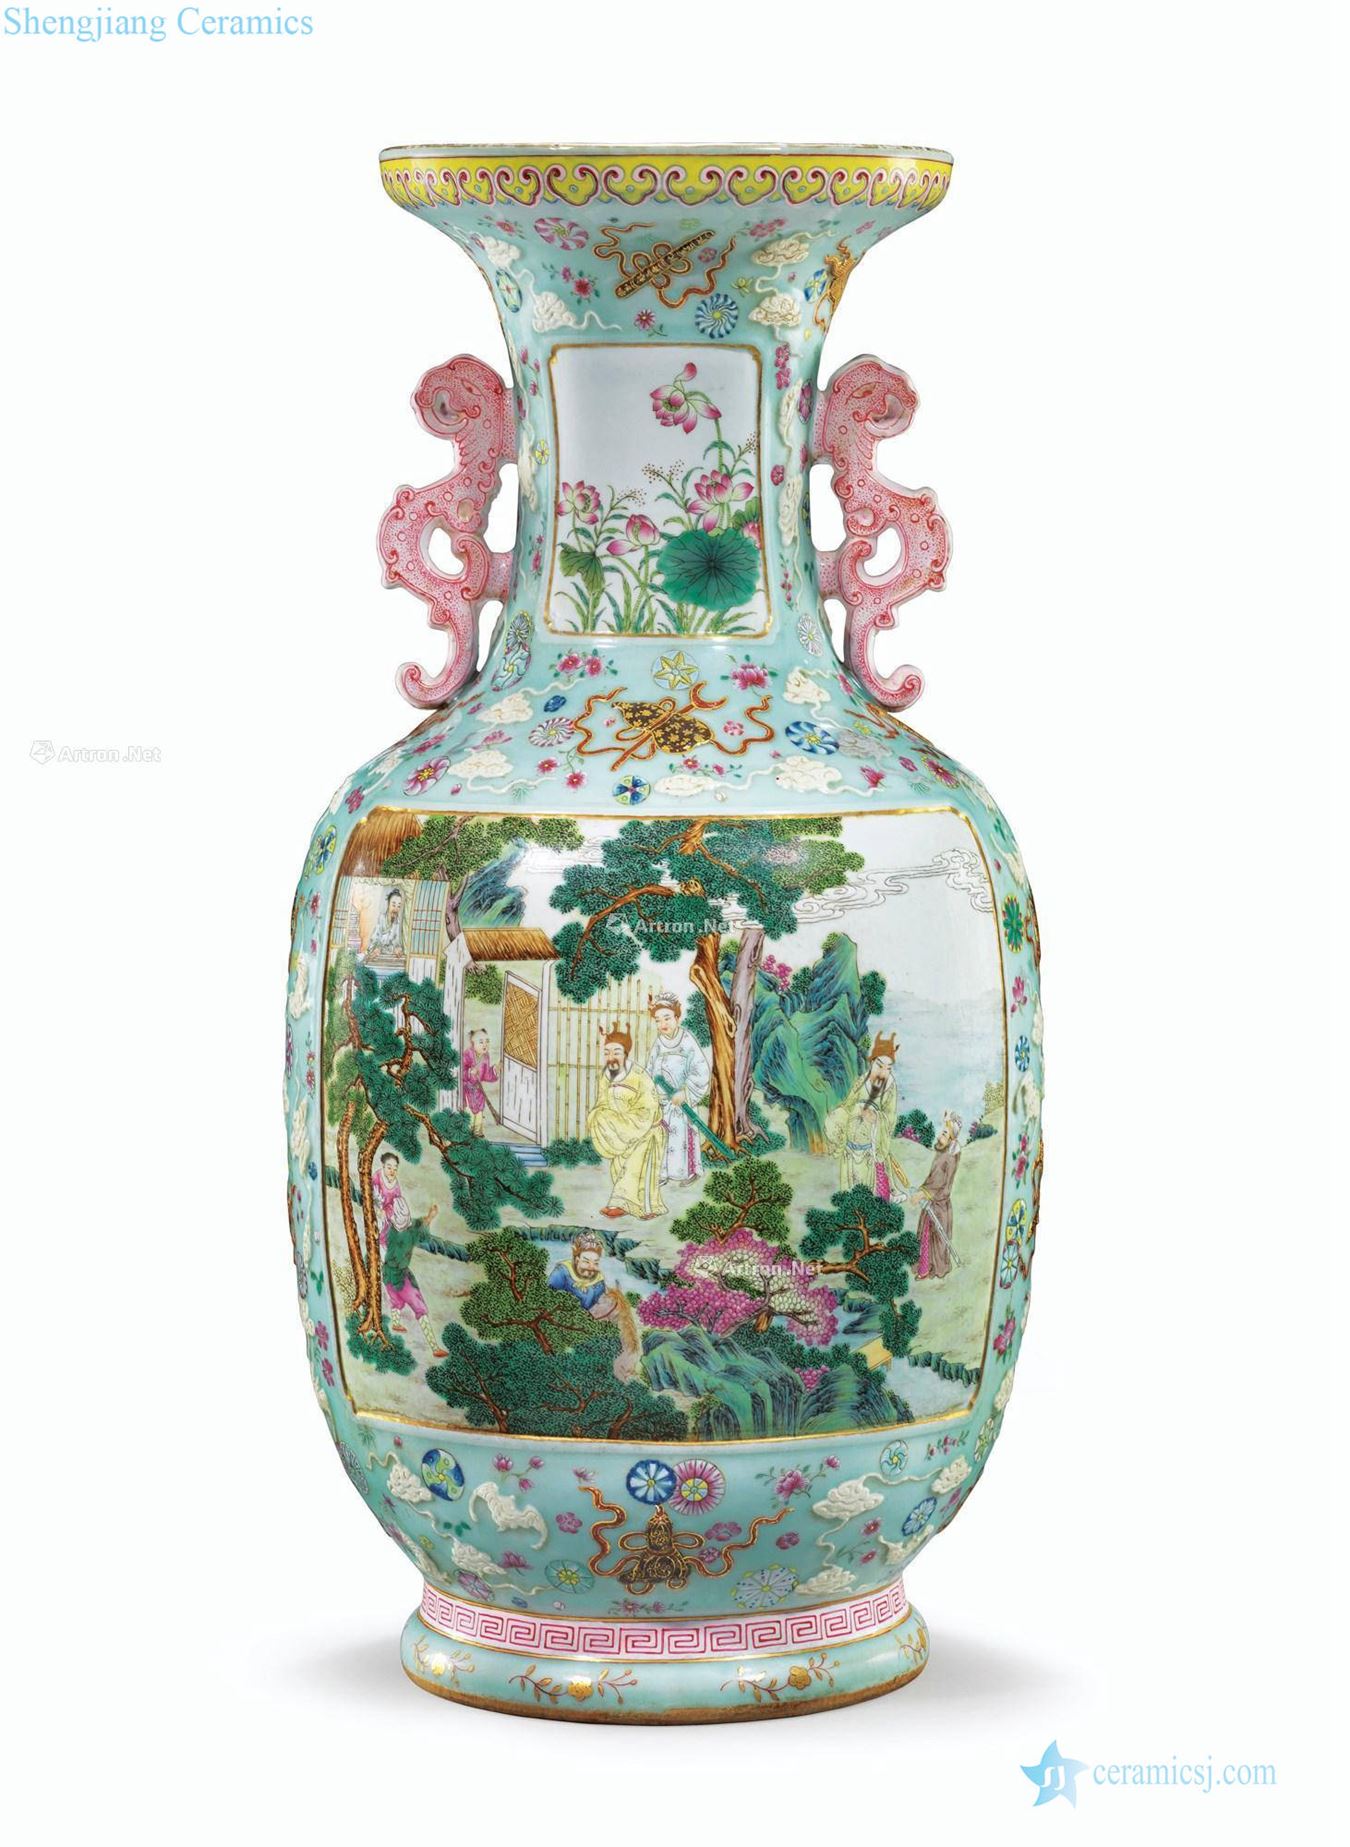 The qianlong period (1736-1795), AN EXCEPTIONAL RARE AND LARGE FAMILLE ROSE VASE